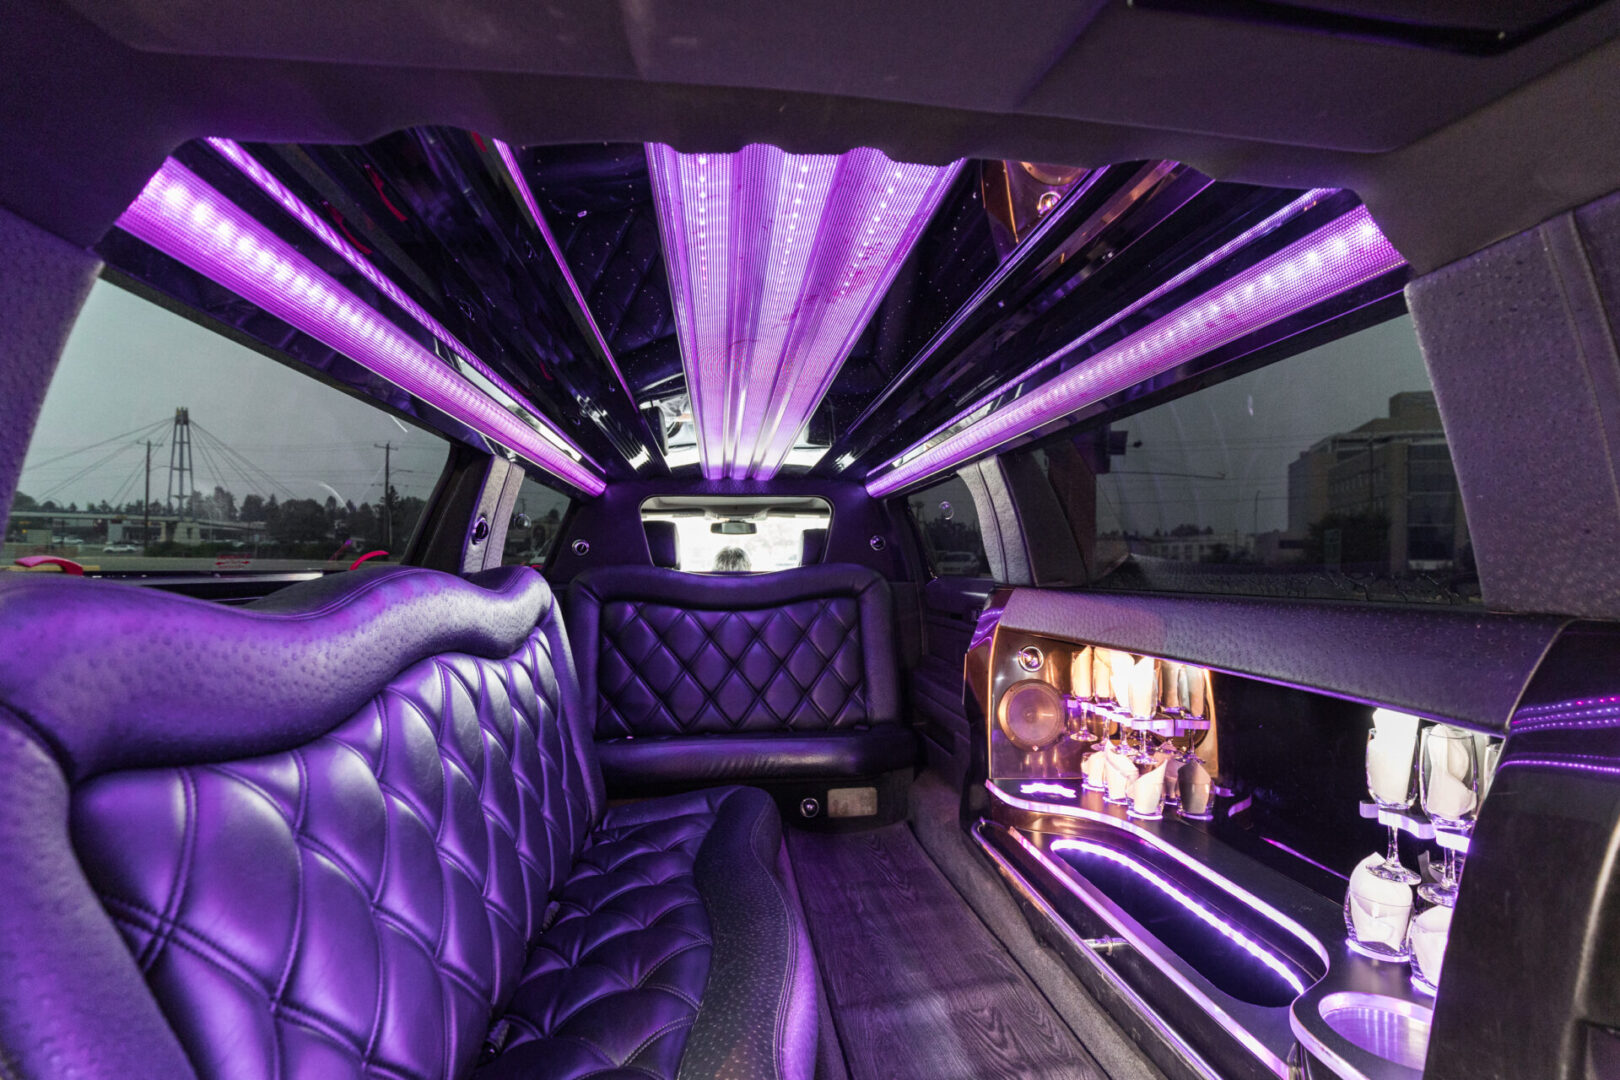 A limo with purple lights and leather seats.